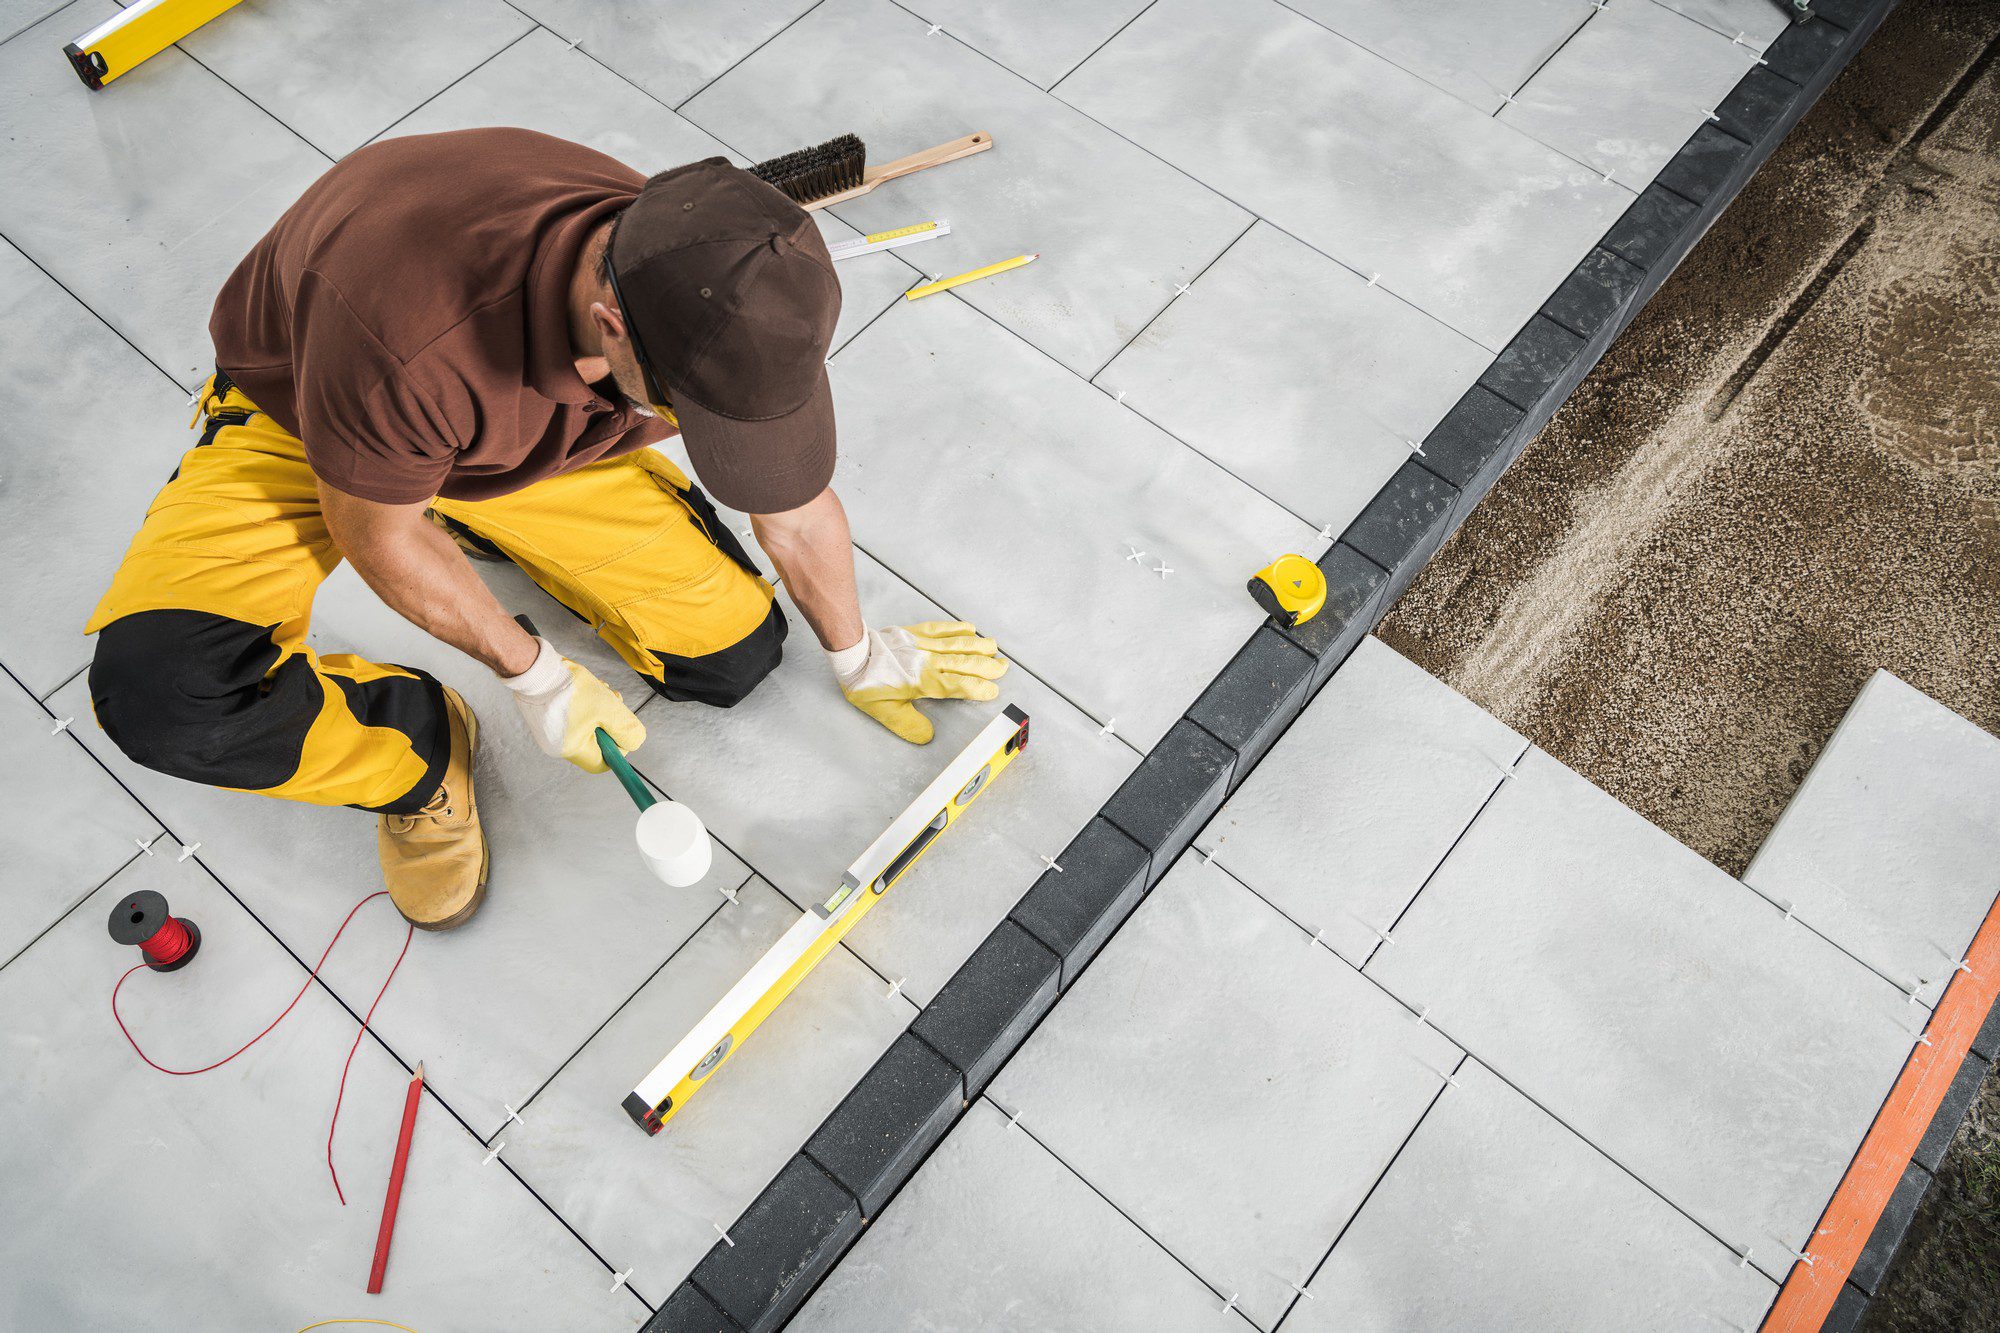 The image shows a person engaged in the process of laying floor tiles. This individual is wearing work gloves, knee pads, and sturdy boots for protection, and they appear to be using a leveling system to ensure the tiles are flat and even. The tools and materials visible in the image include a spirit level, a rubber mallet, spacer crosses which help maintain consistent gaps between tiles, a measuring tape, and what appears to be a thin-set adhesive applied with a notched trowel, which is commonly used to adhere tiles to the surface.The flooring project is in progress, as indicated by the partially laid tiles and the exposed underlayment where the work has not yet been completed. The person seems to be focused on precisely placing and leveling the tiles to achieve a professional and aesthetically pleasing result.